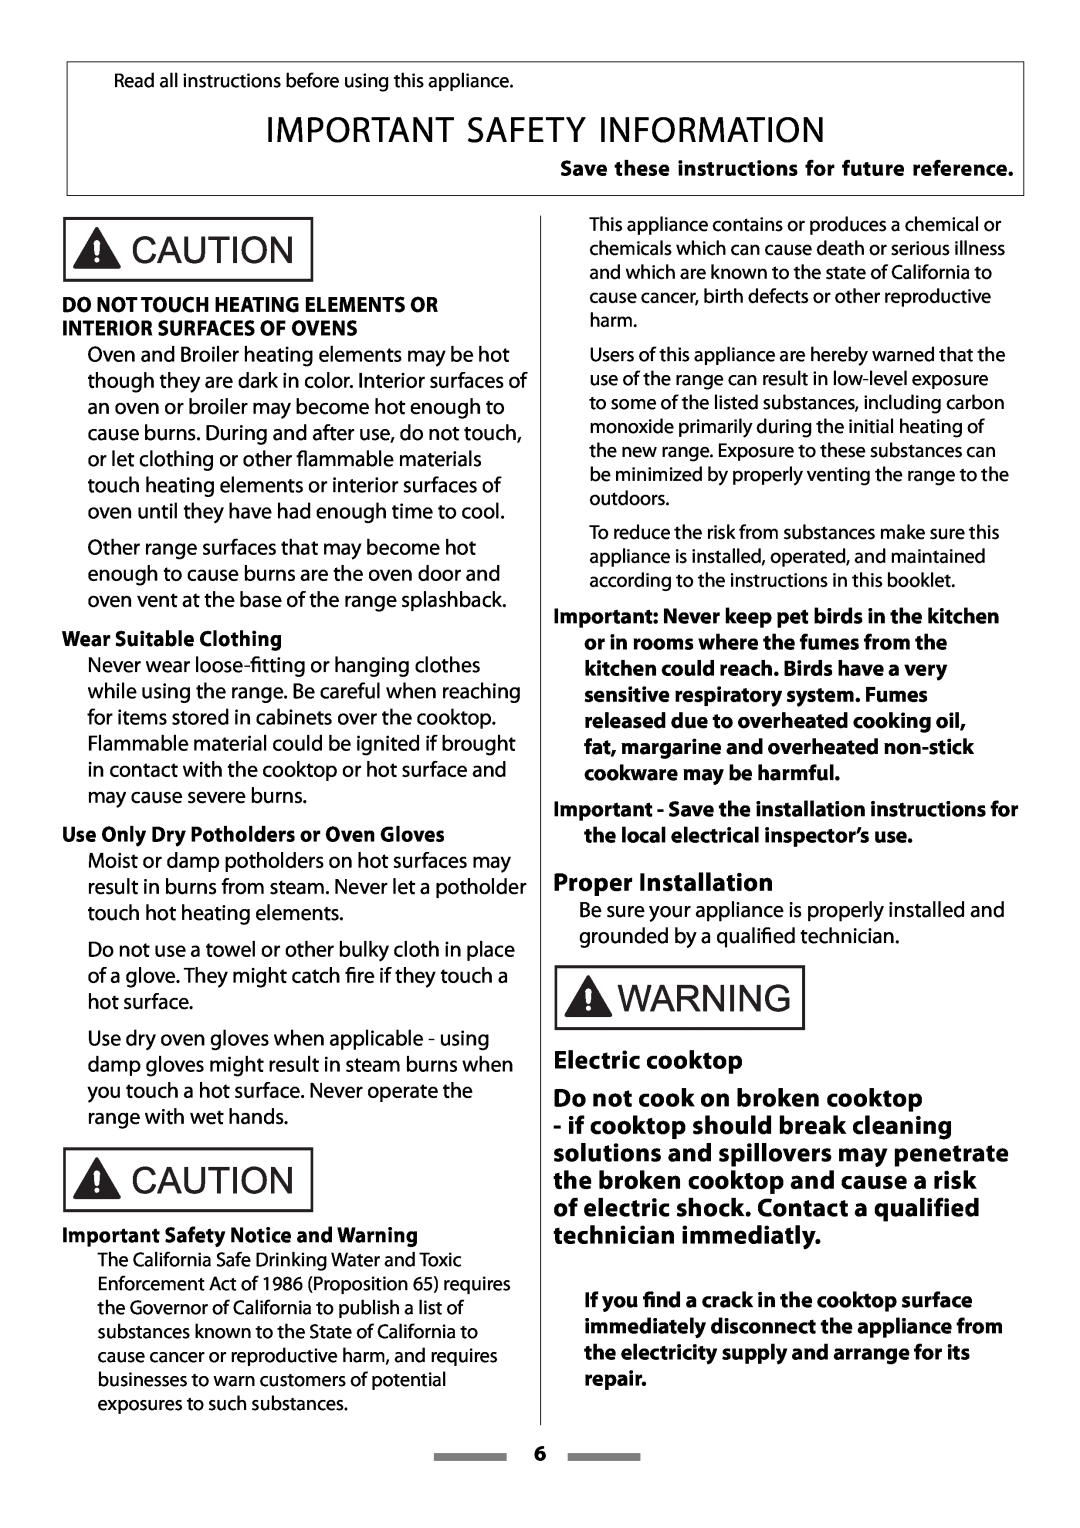 Aga Ranges Legacy 44 Proper Installation, Electric cooktop Do not cook on broken cooktop, Important Safety Information 